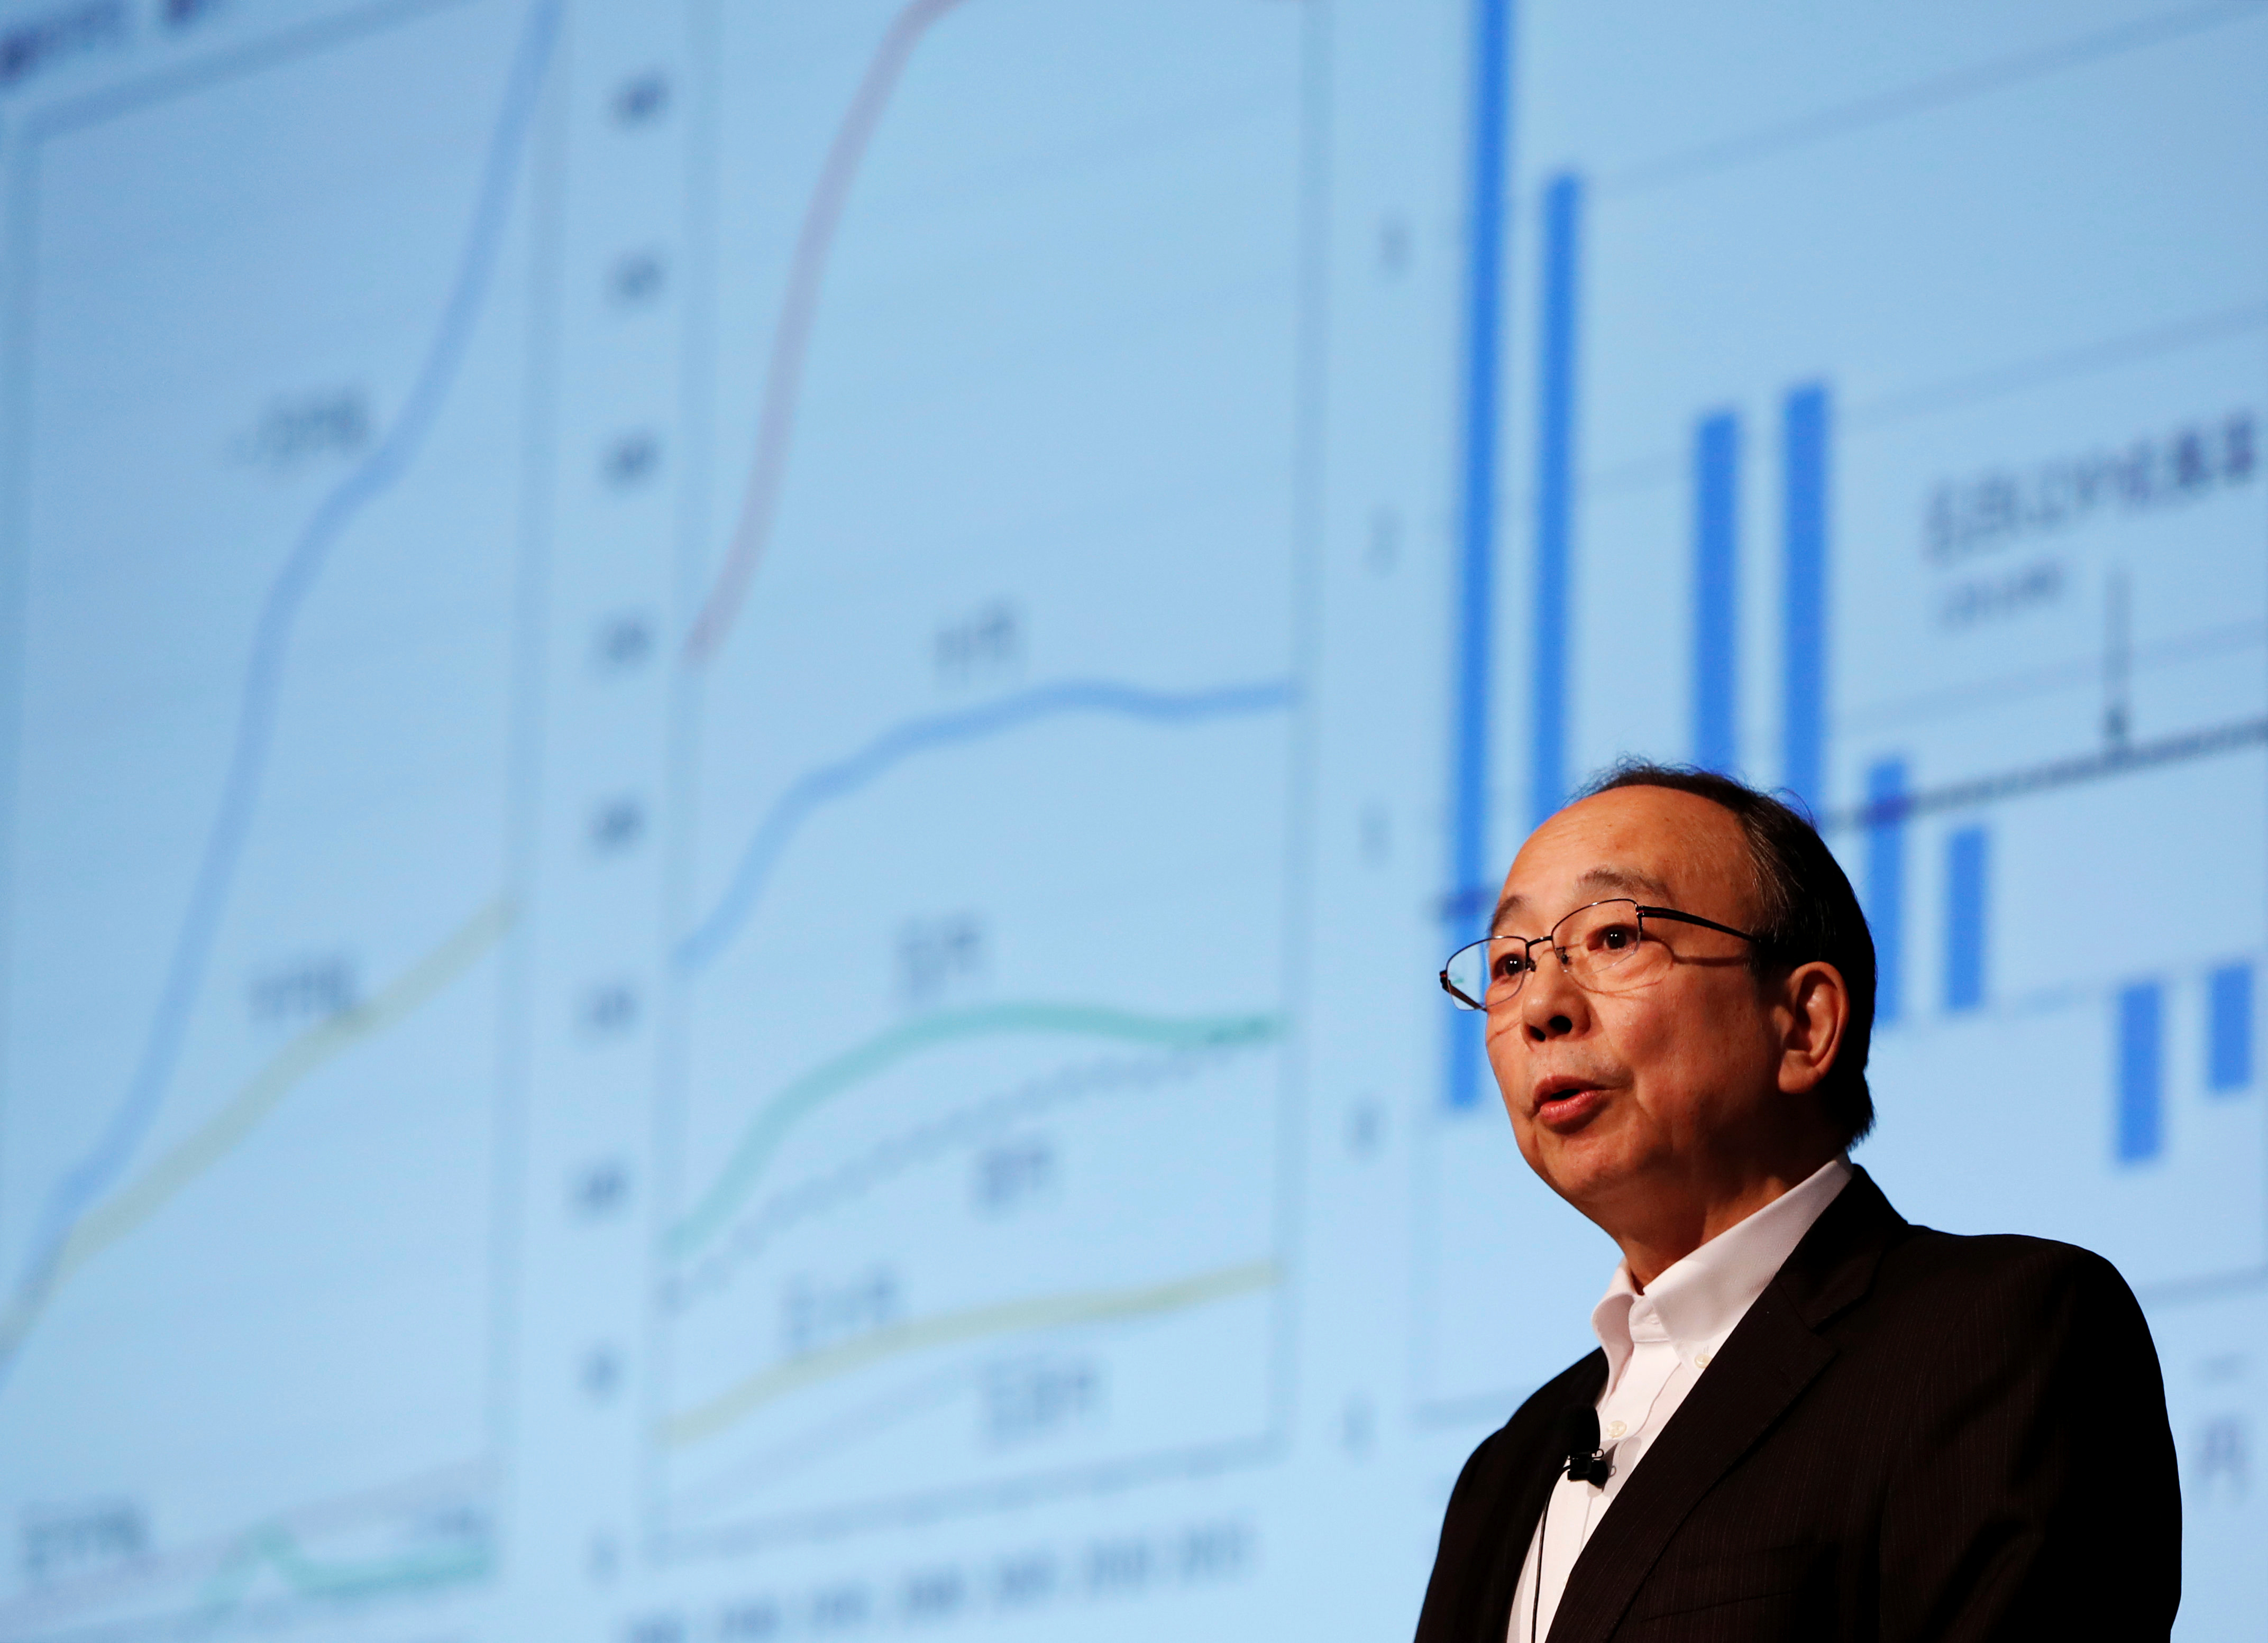 Bank of Japan Deputy Governor Masayoshi Amamiya speaks during a Reuters Newsmaker event in Tokyo